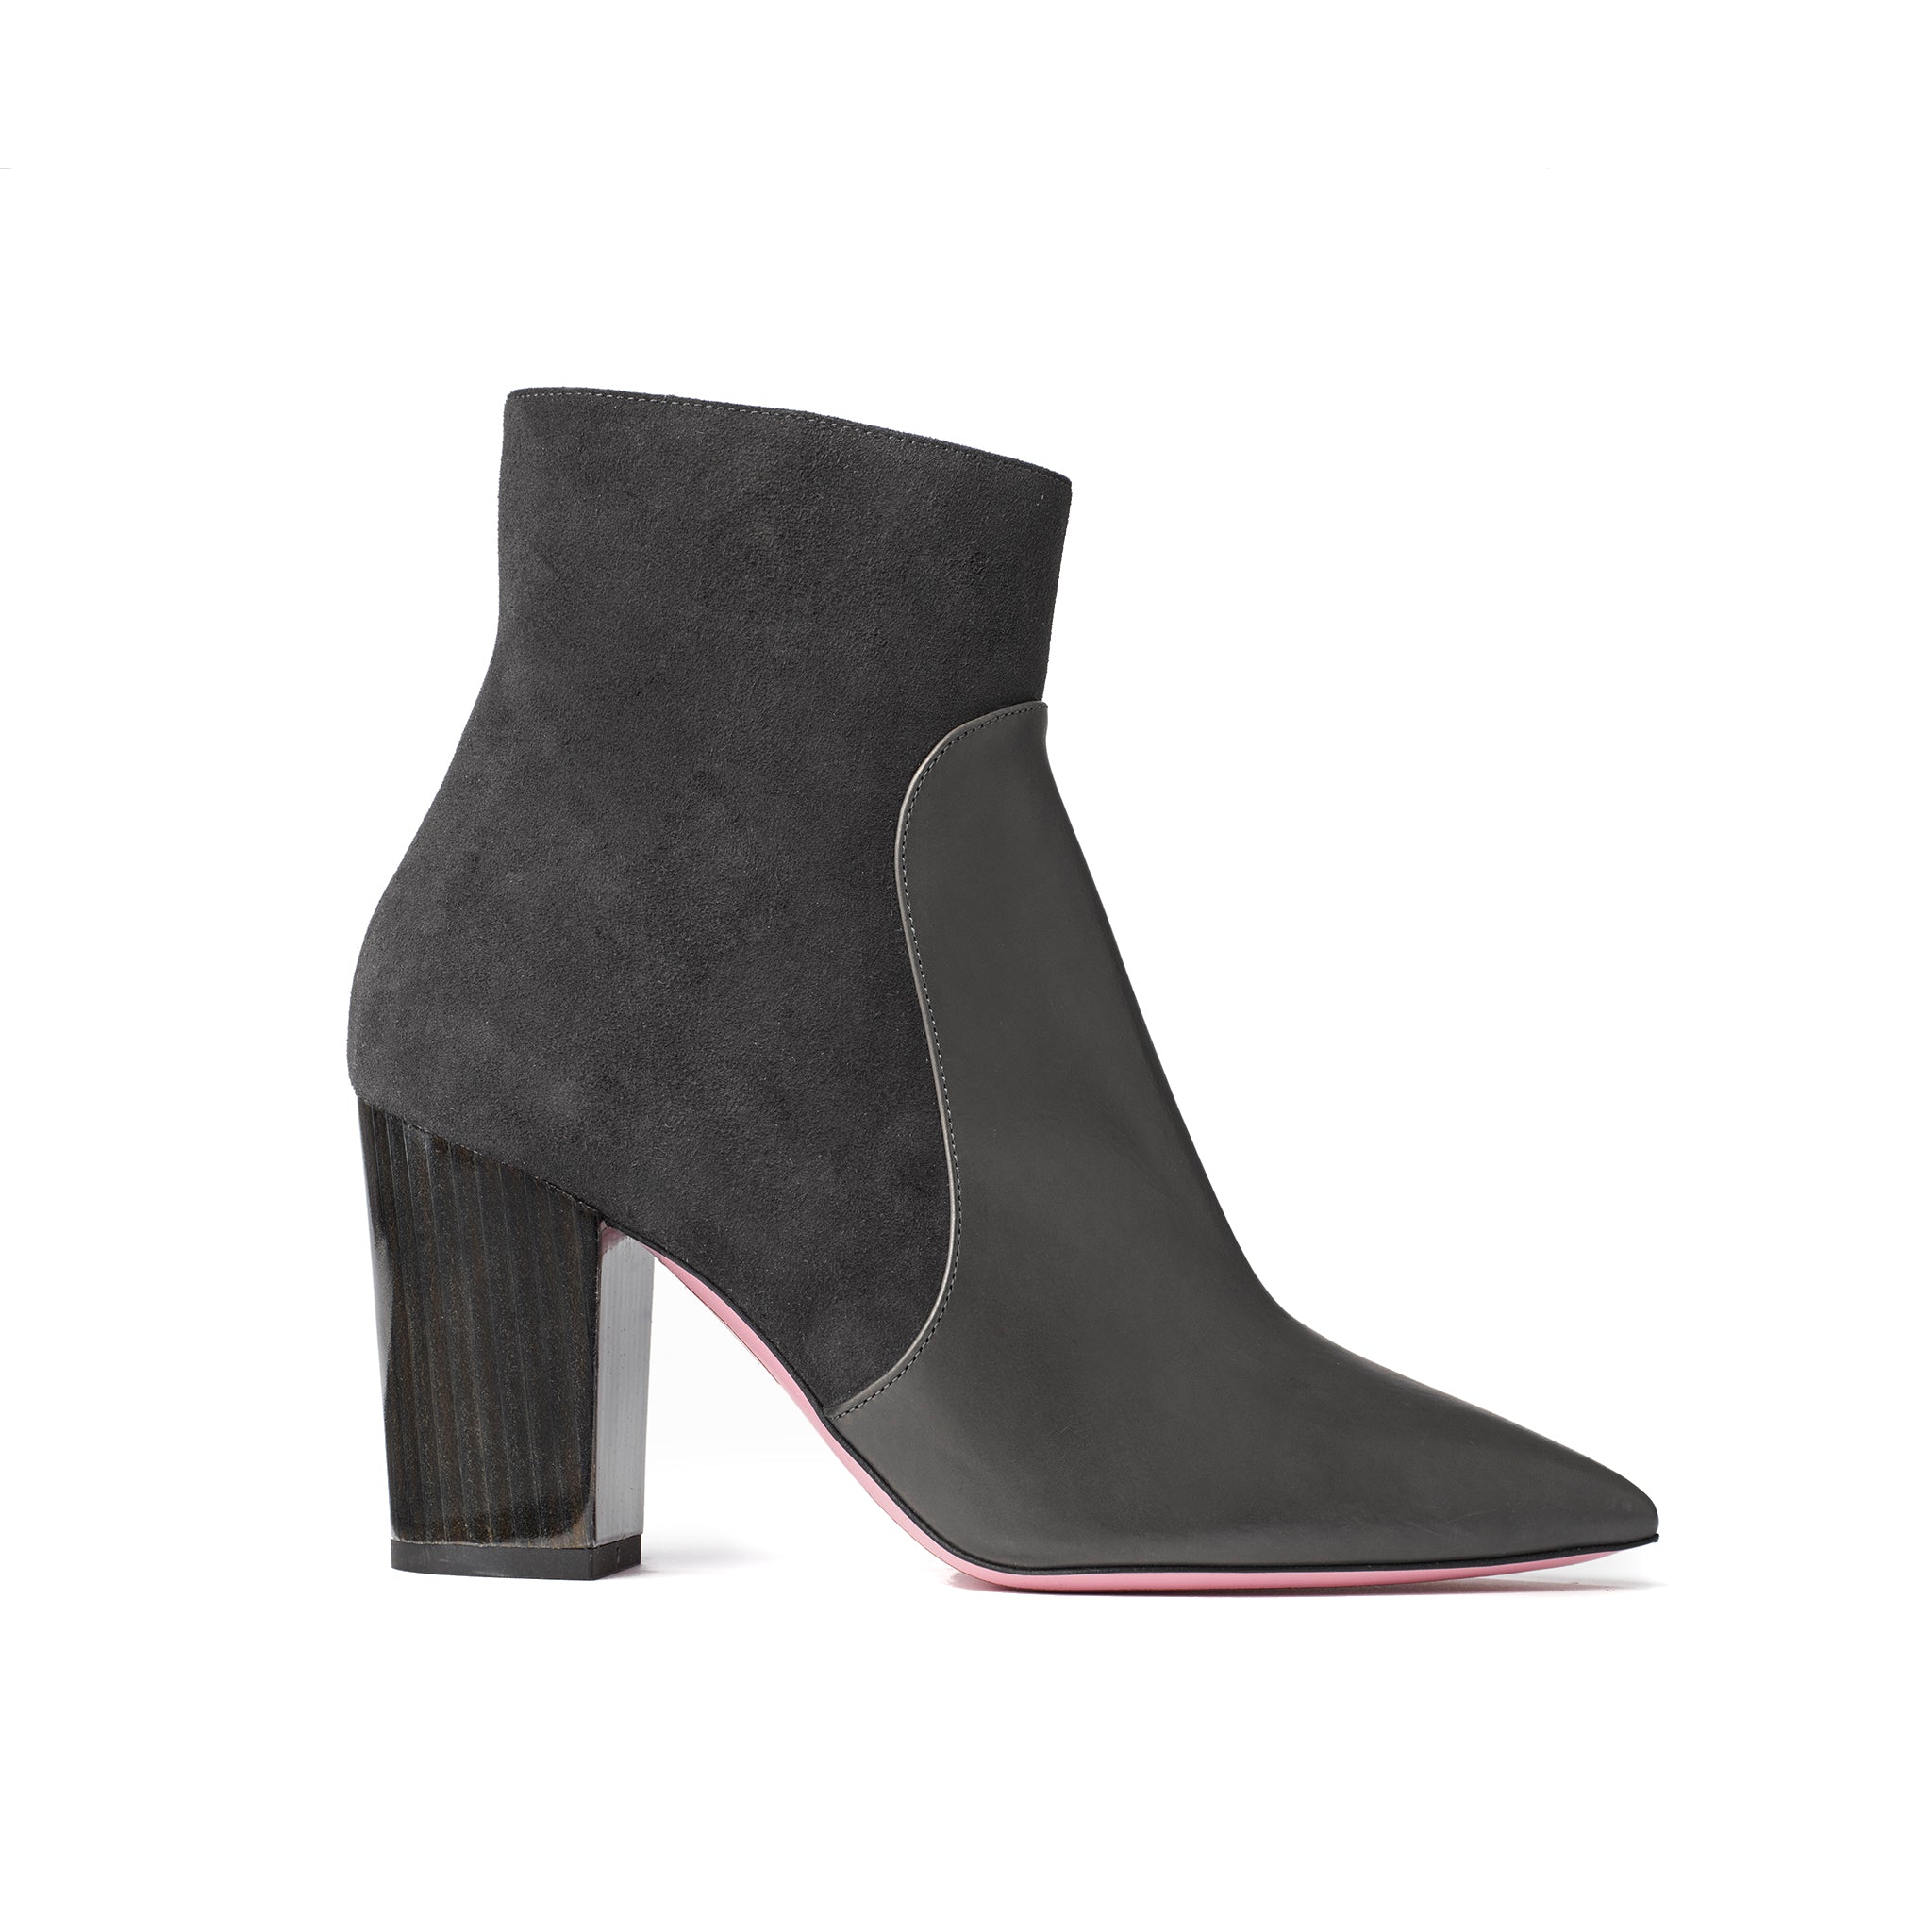 Phare Pointed block heel boot in carbone suede and leather made in Italy